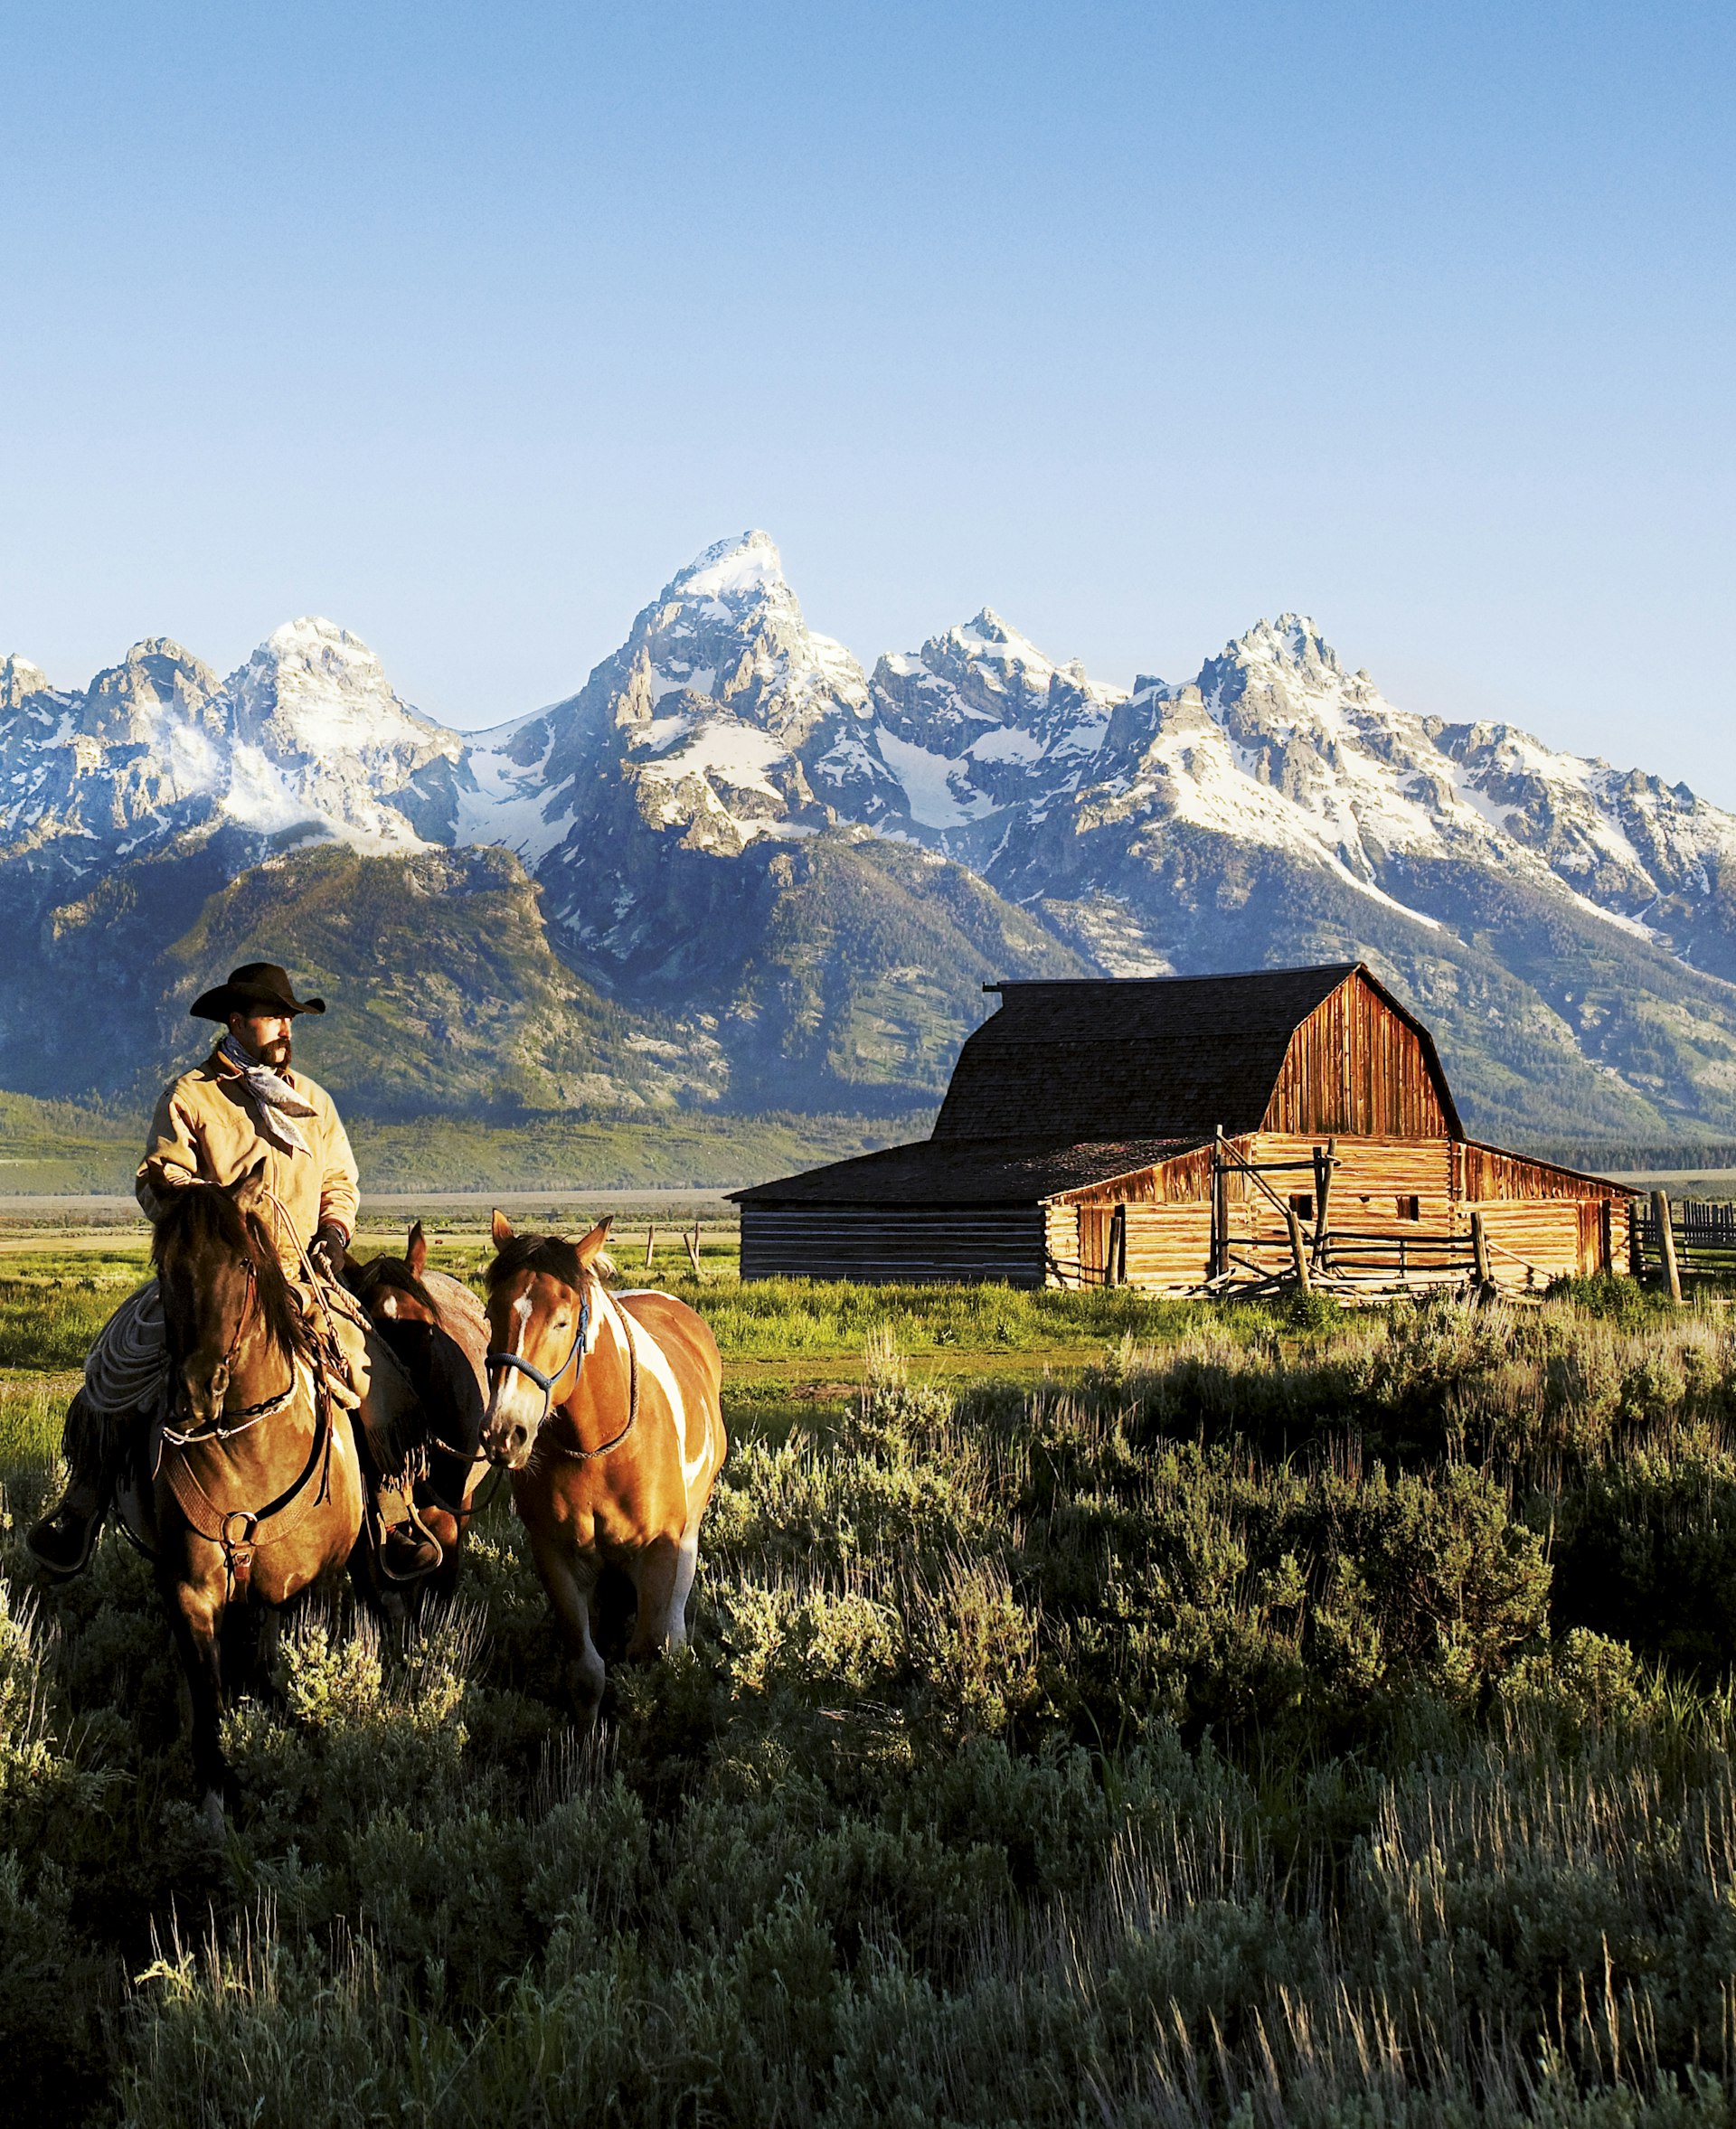 A cowboy on horseback leads another horse in front of a historic barn and the snow-capped Grand Tetons in Mormon Row